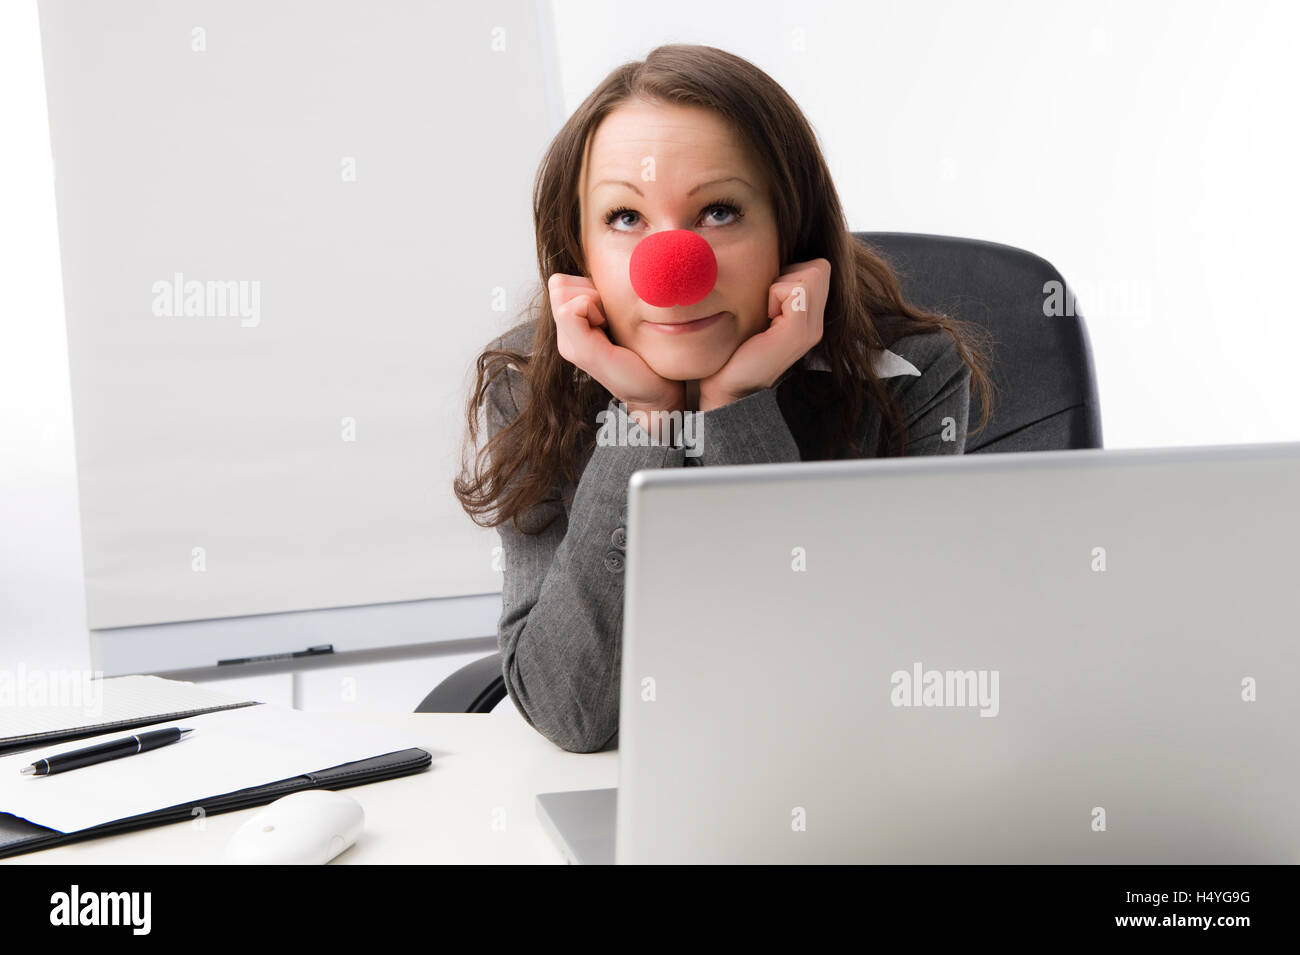 Business Woman with a red clown nose Banque D'Images